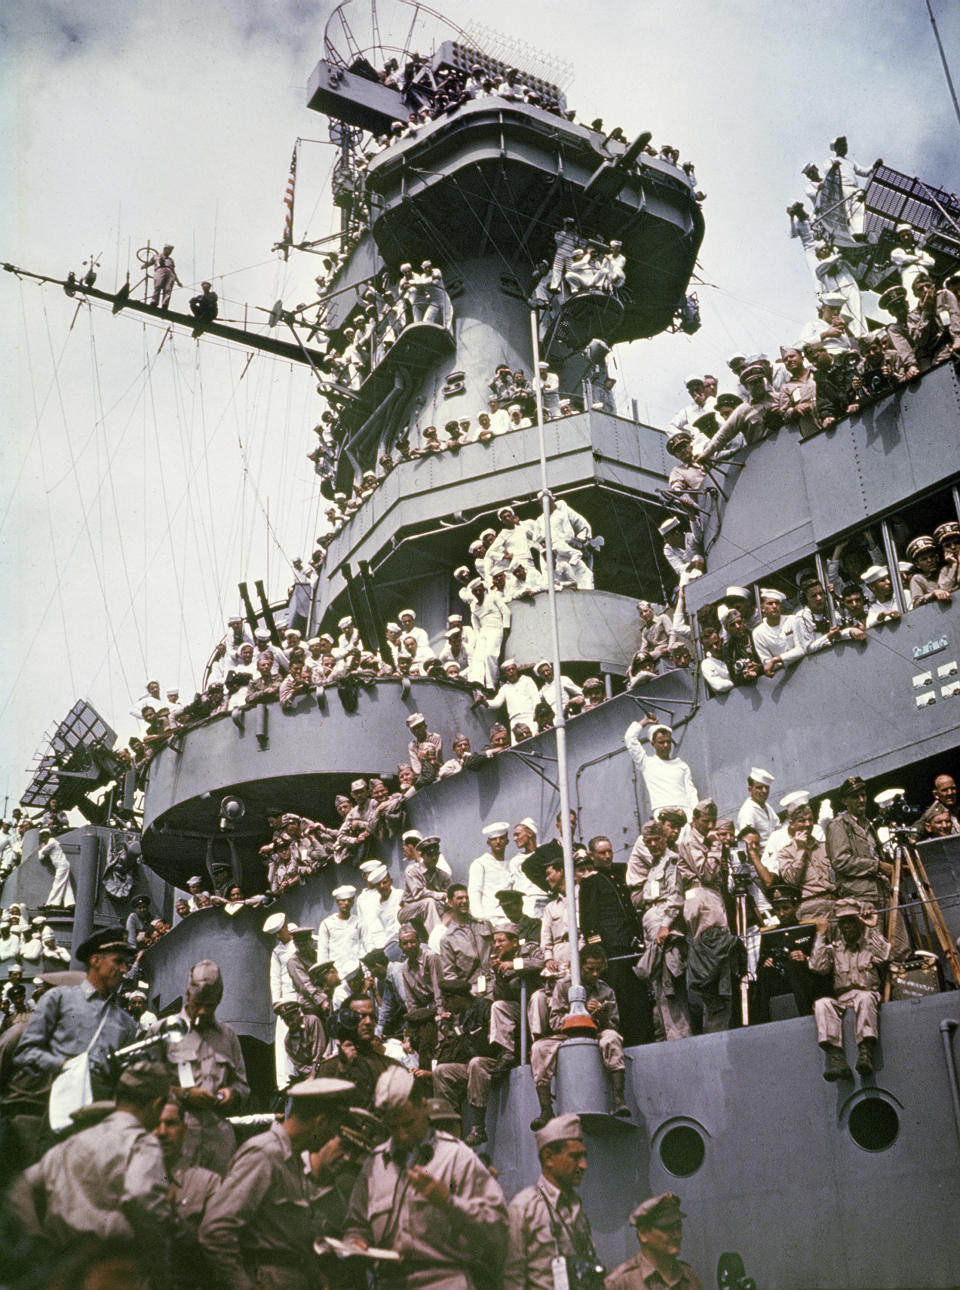 FILE - Servicemen, reporters, and photographers perch on the USS Missouri on Sept. 2, 1945, for the onboard ceremony in which Japan surrendered in Tokyo Bay, ending World War II. Several dozen aging U.S. veterans, including some who were in Tokyo Bay as swarms of warplanes buzzed overhead and nations converged to end World War II, will gather on the battleship in Pearl Harbor in September to mark the 75th anniversary of Japan's surrender, even if it means the vulnerable group may be risking their lives again amid the coronavirus pandemic. (AP Photo, File)